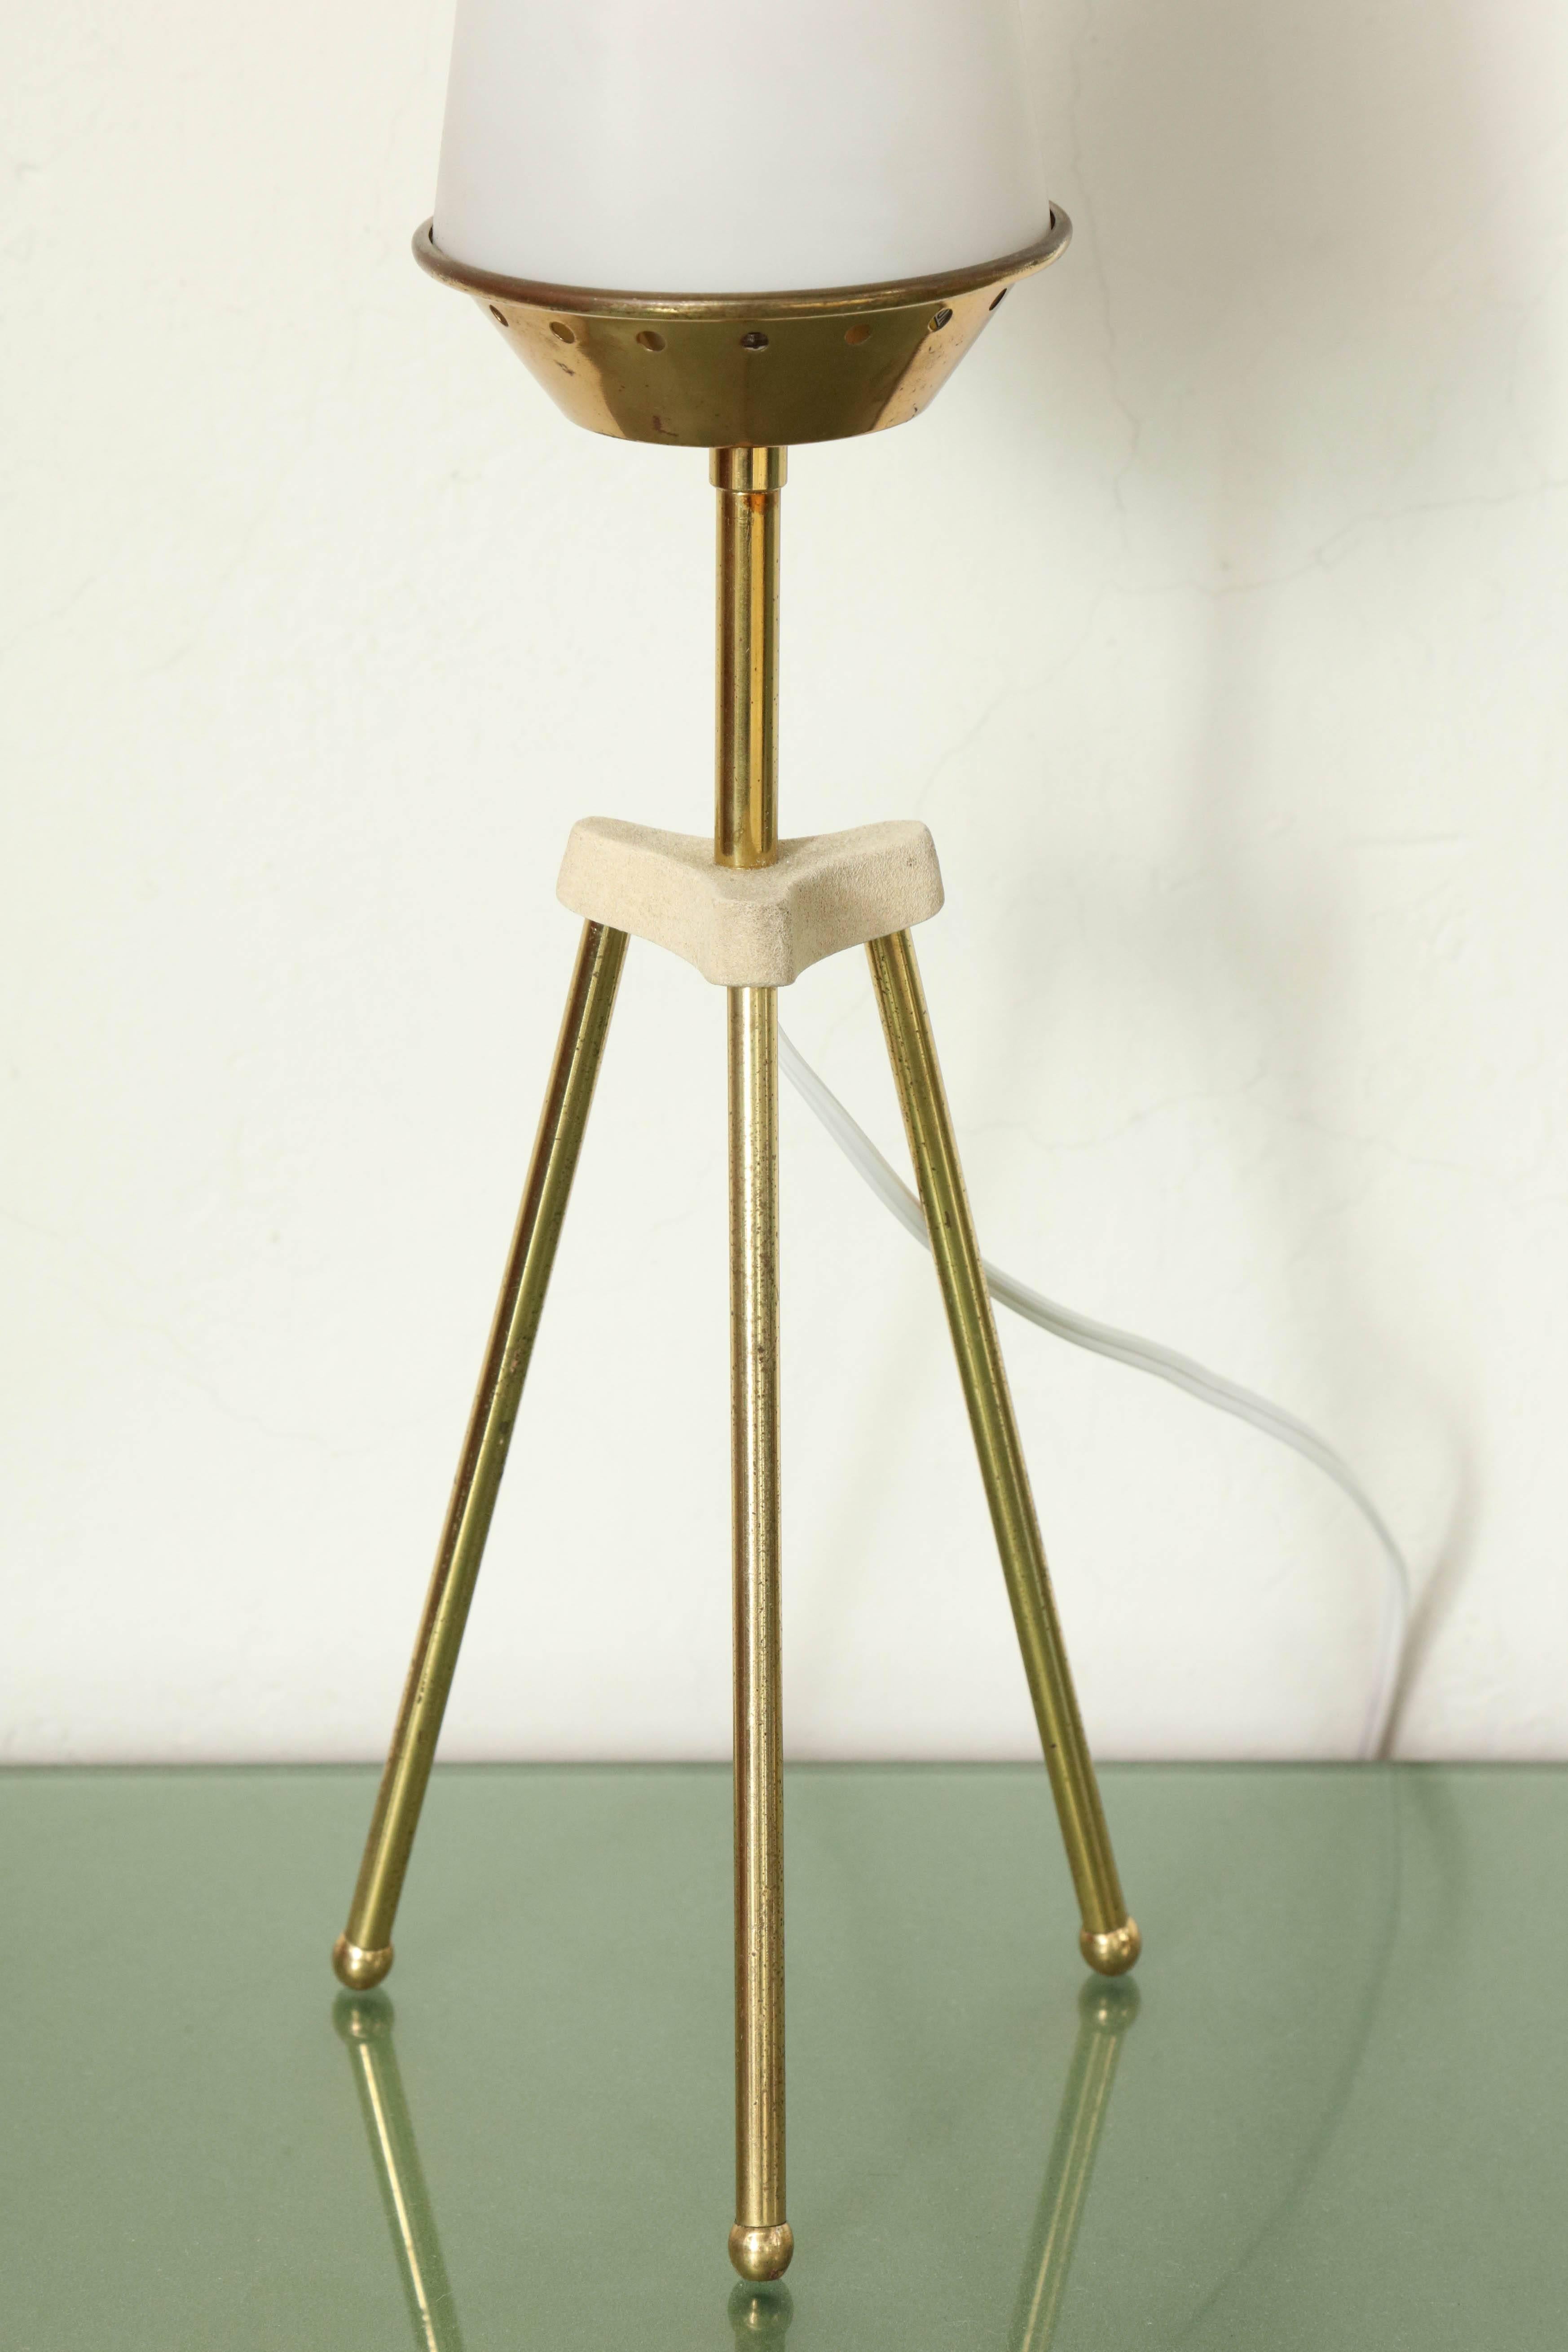 Futuristic table lamp made in Milan 1950 by Stilnovo signed. White opaline glass shade on a tripod brass and stippled iron base, rare unusual form, all original, great piece, takes one e14 bulb.
 